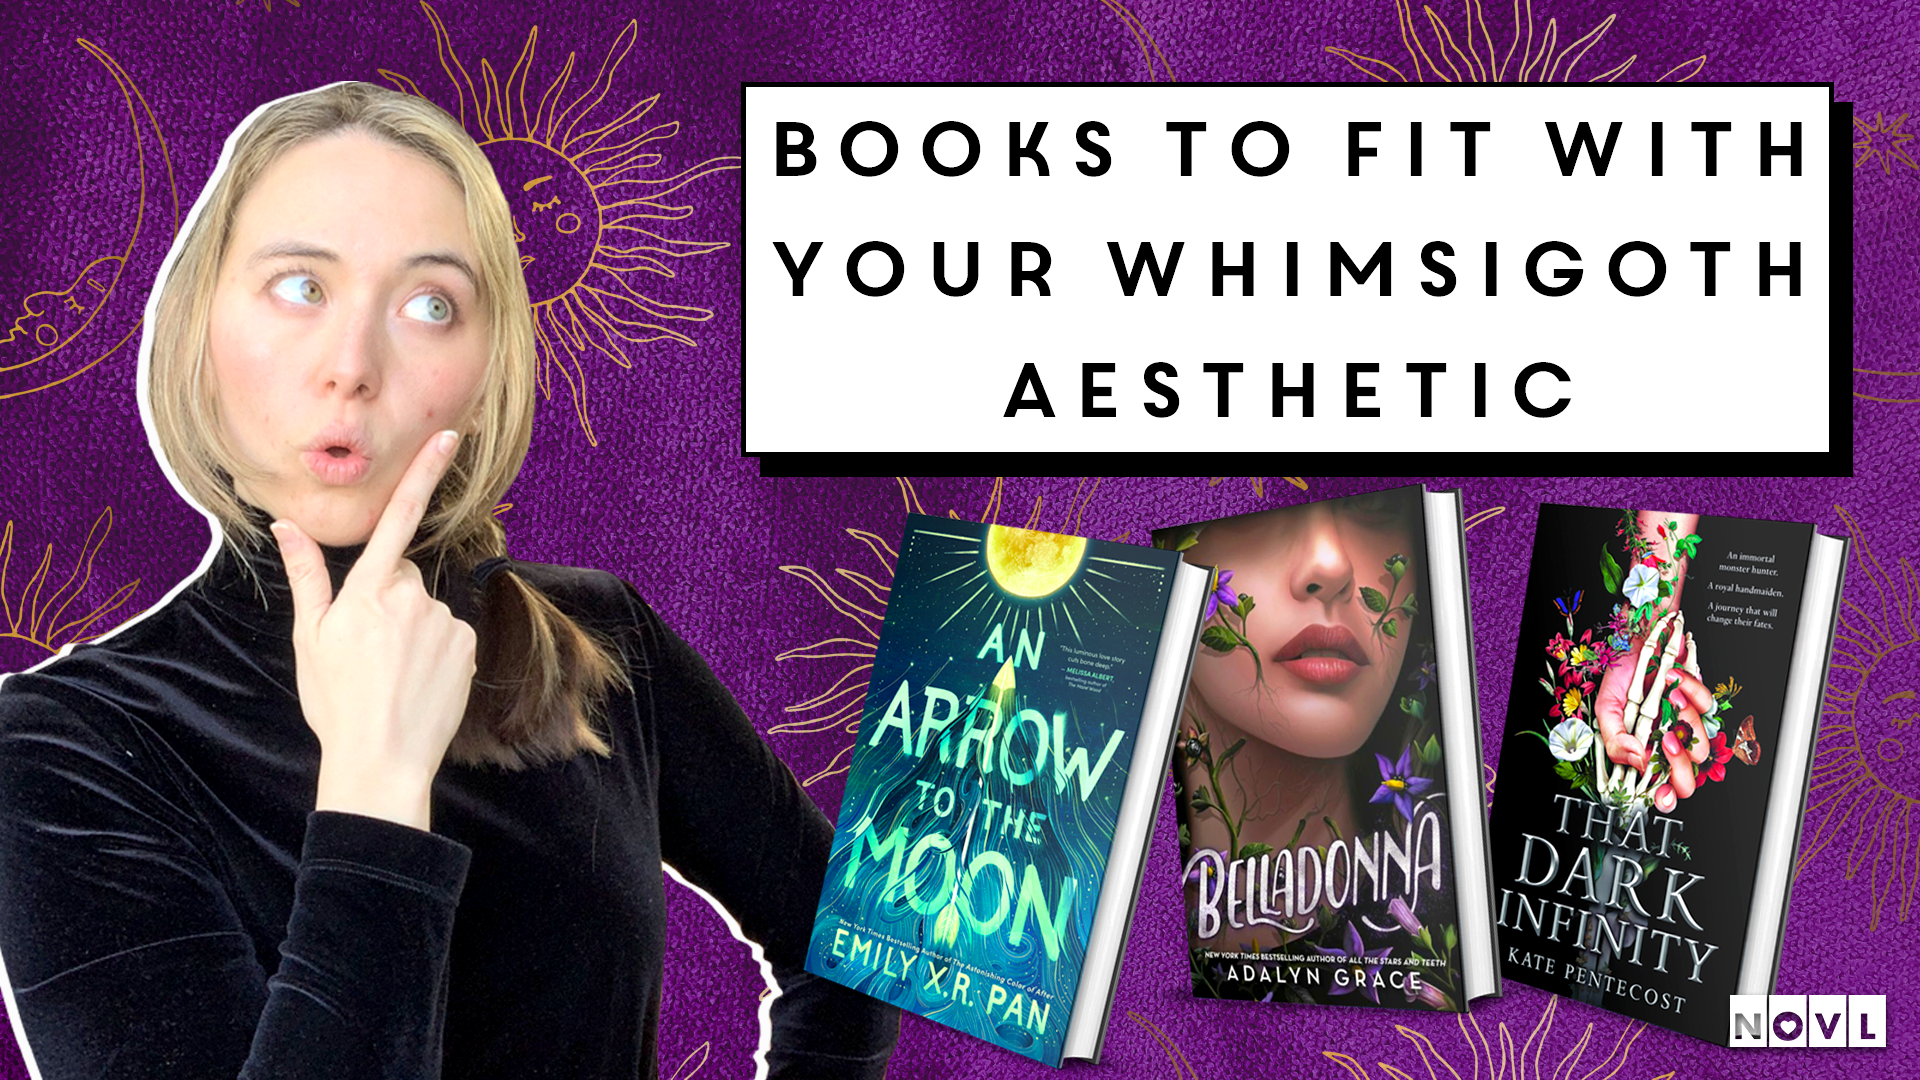 NOVL Blog - Books to Fit With Your Whimsigoth Aesthetic